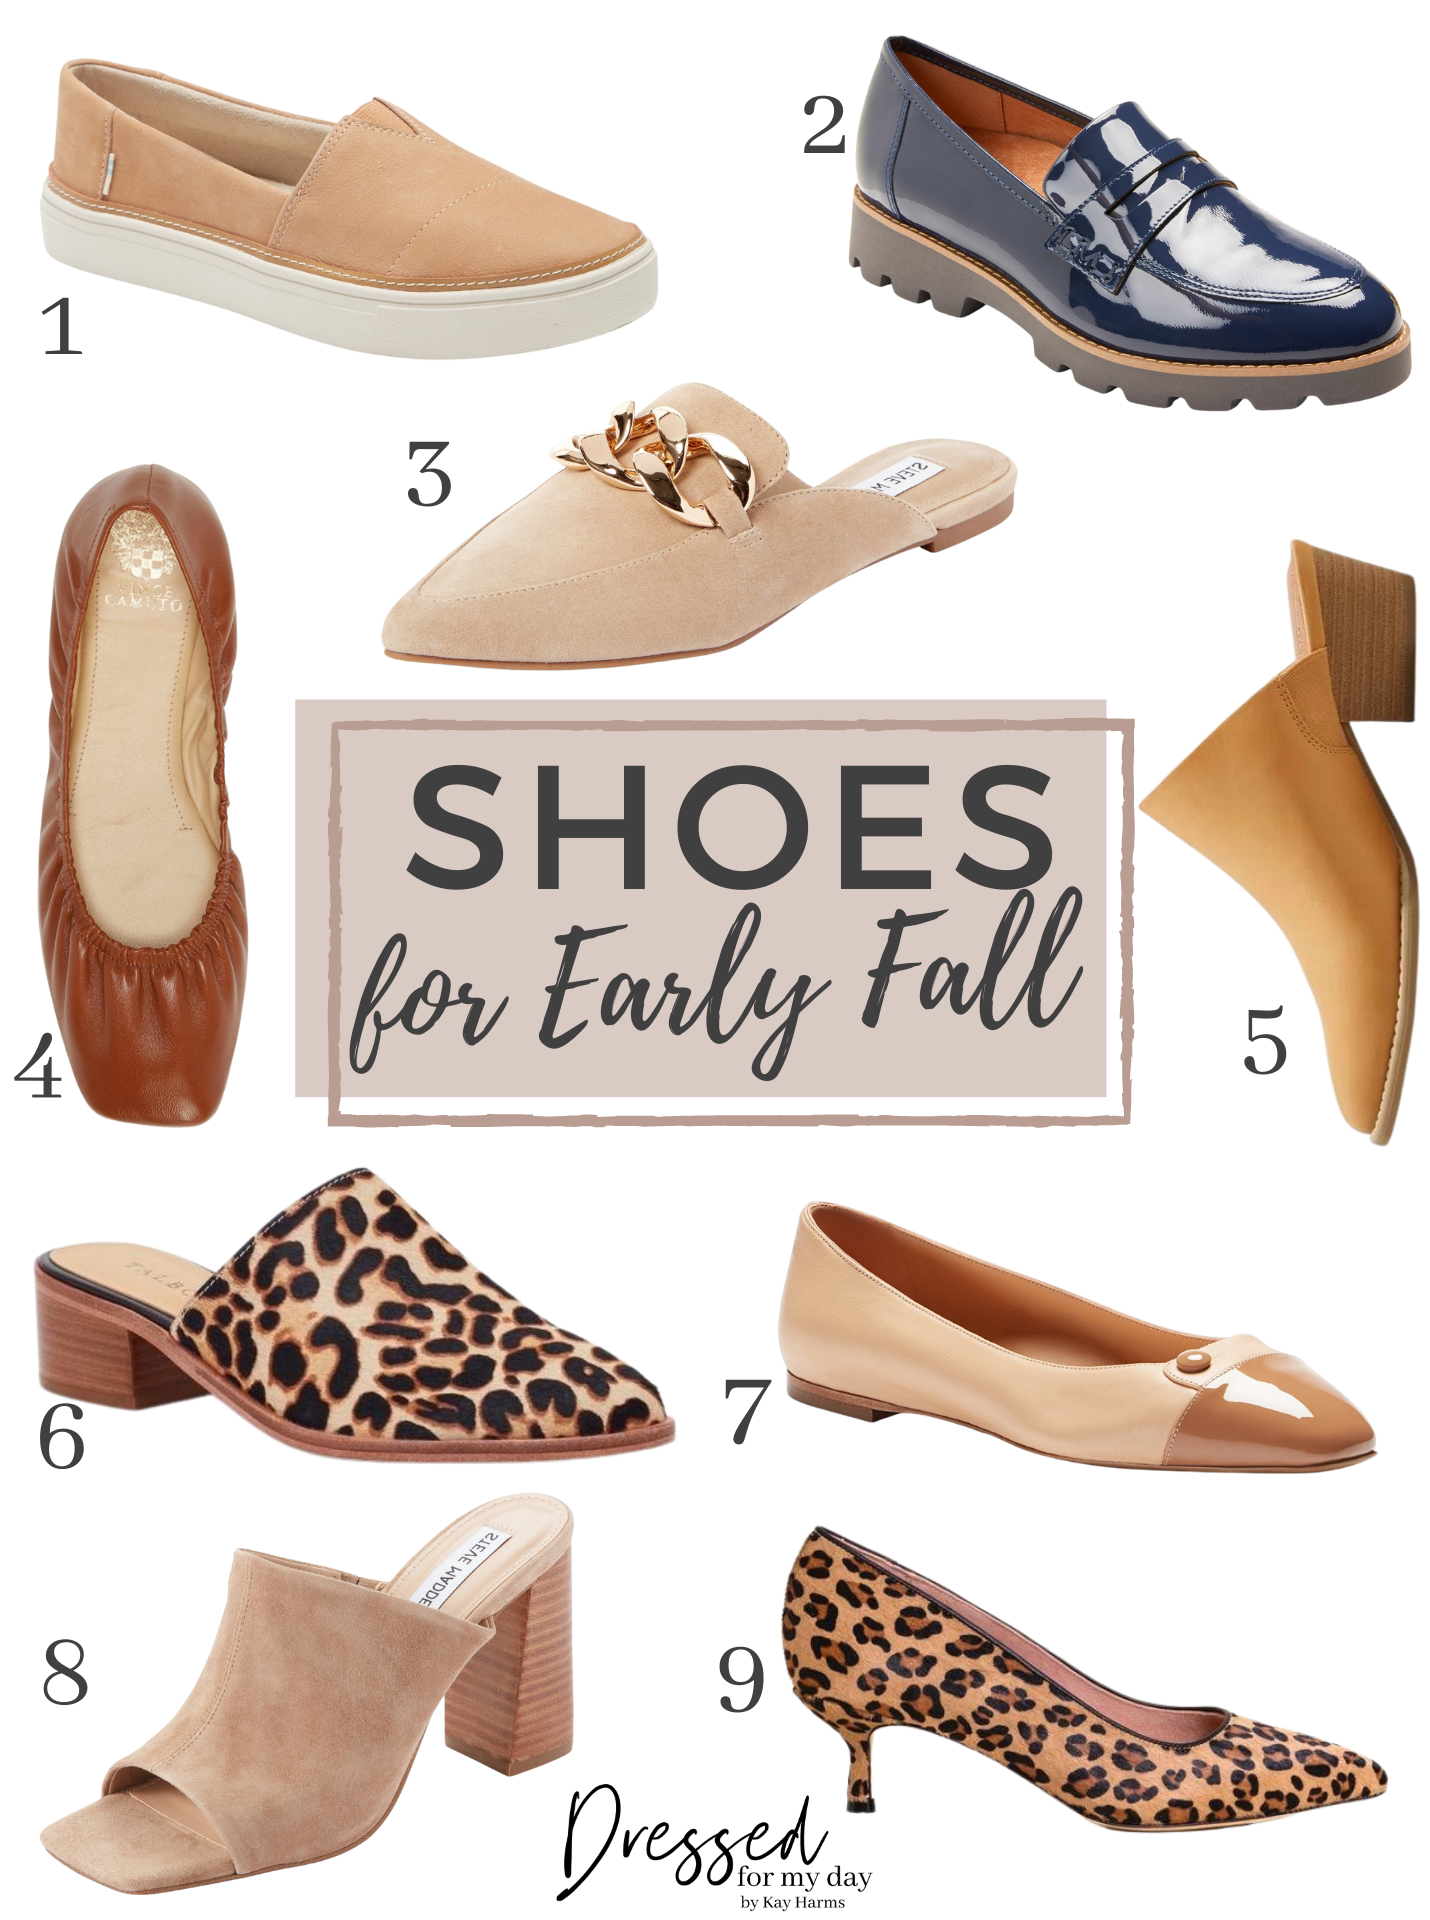 Shoes for Early Fall - Dressed for My Day